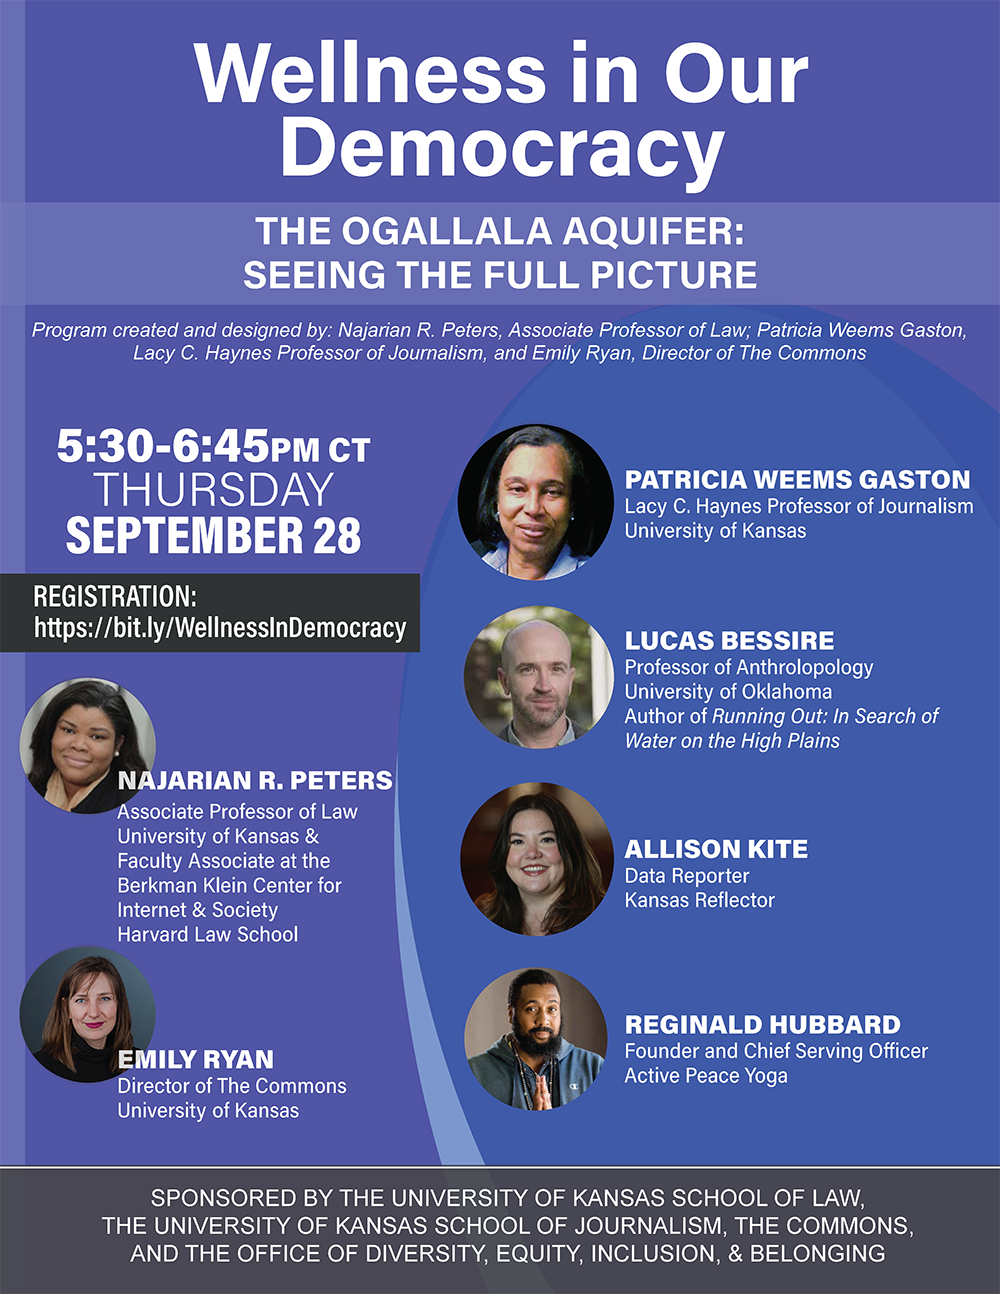 Wellness in Our Democracy event flier with photos of presenters.